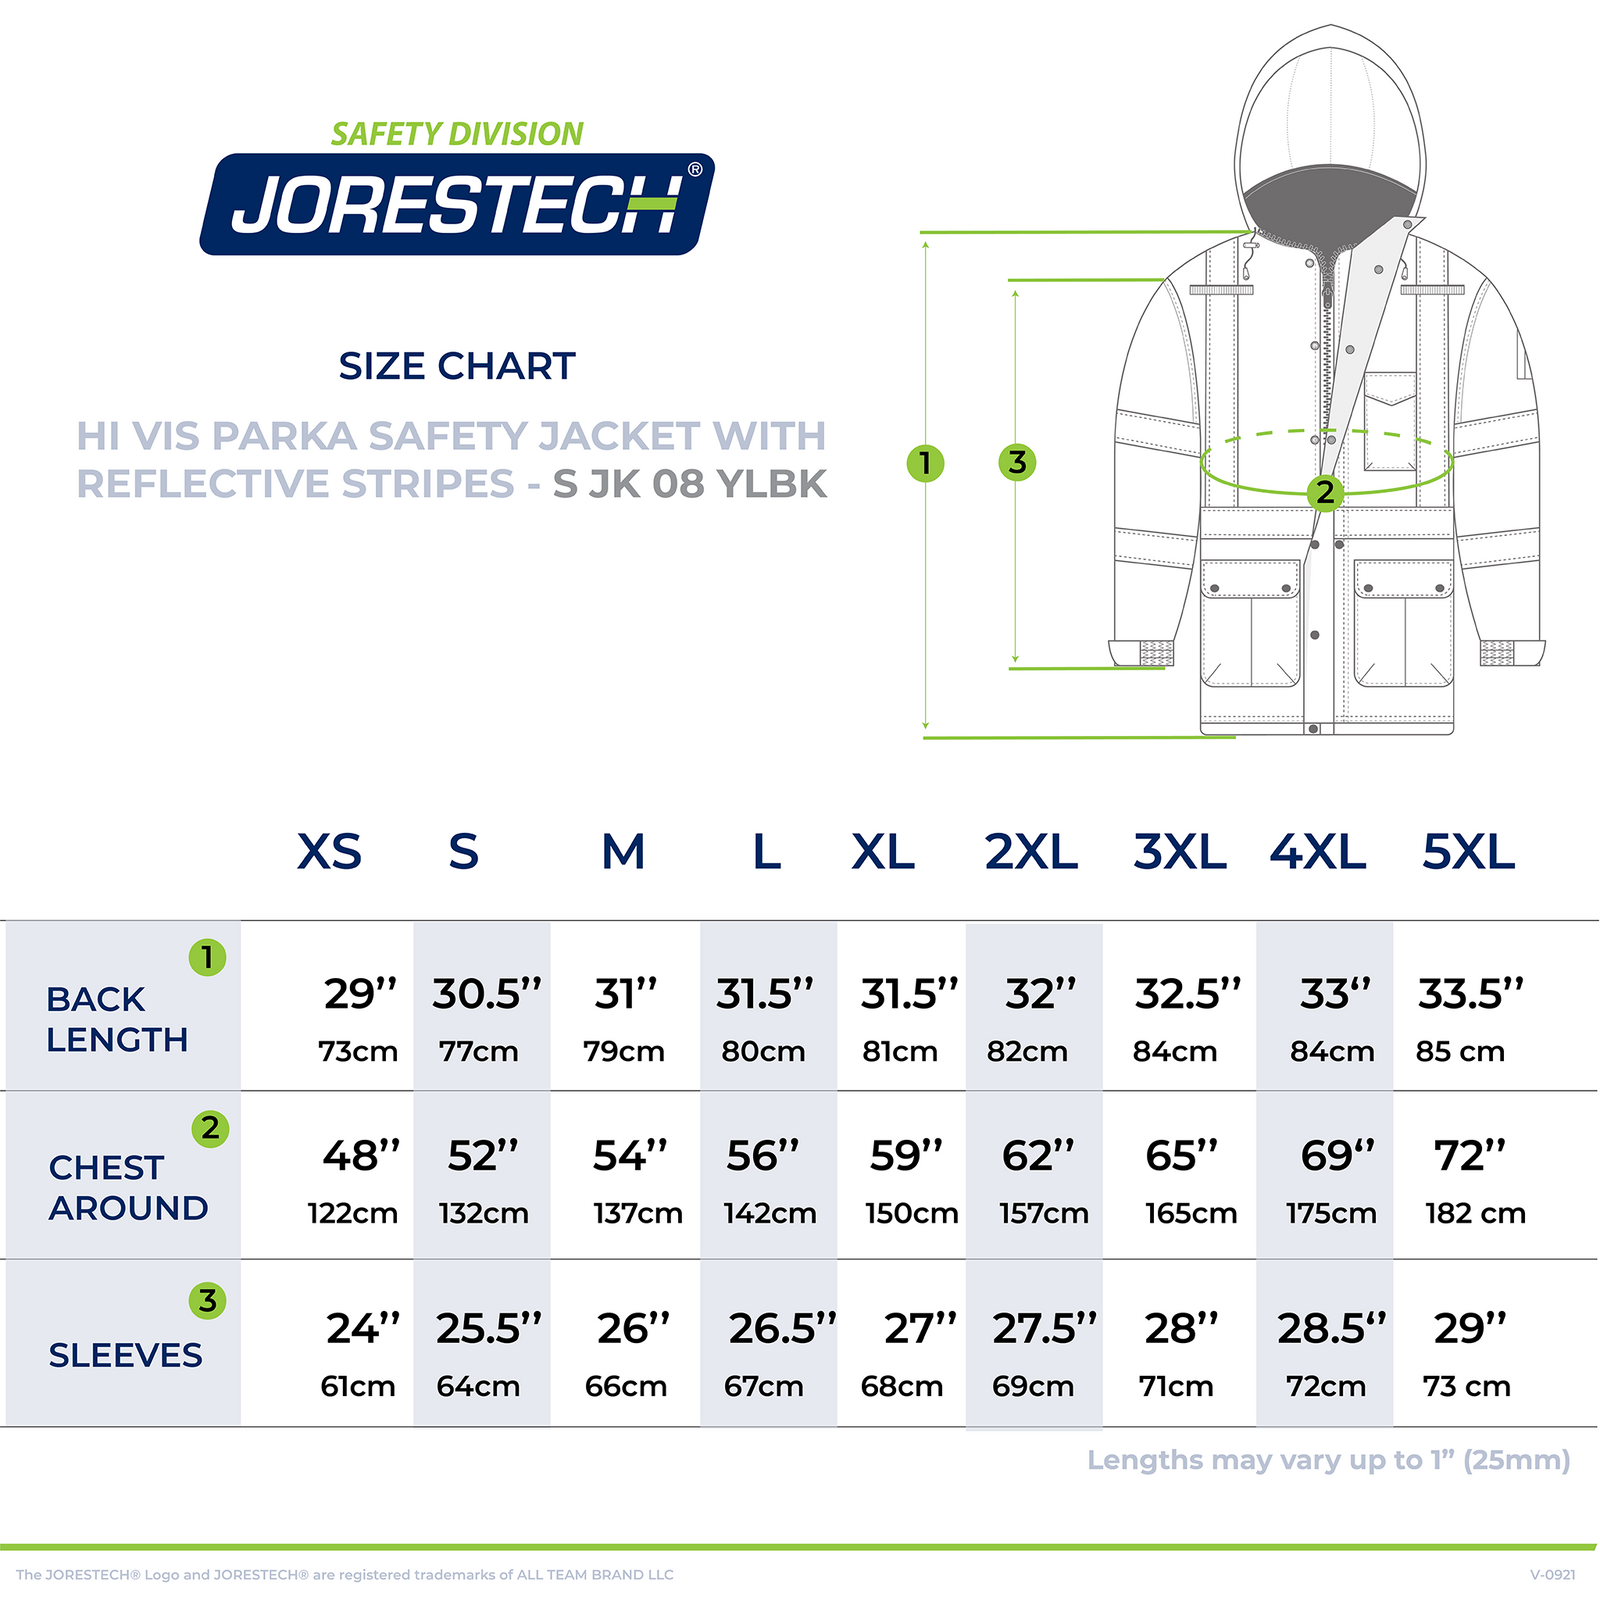 Size chart of the JORESTECH  waterproof safety parka Jacket for winter protection